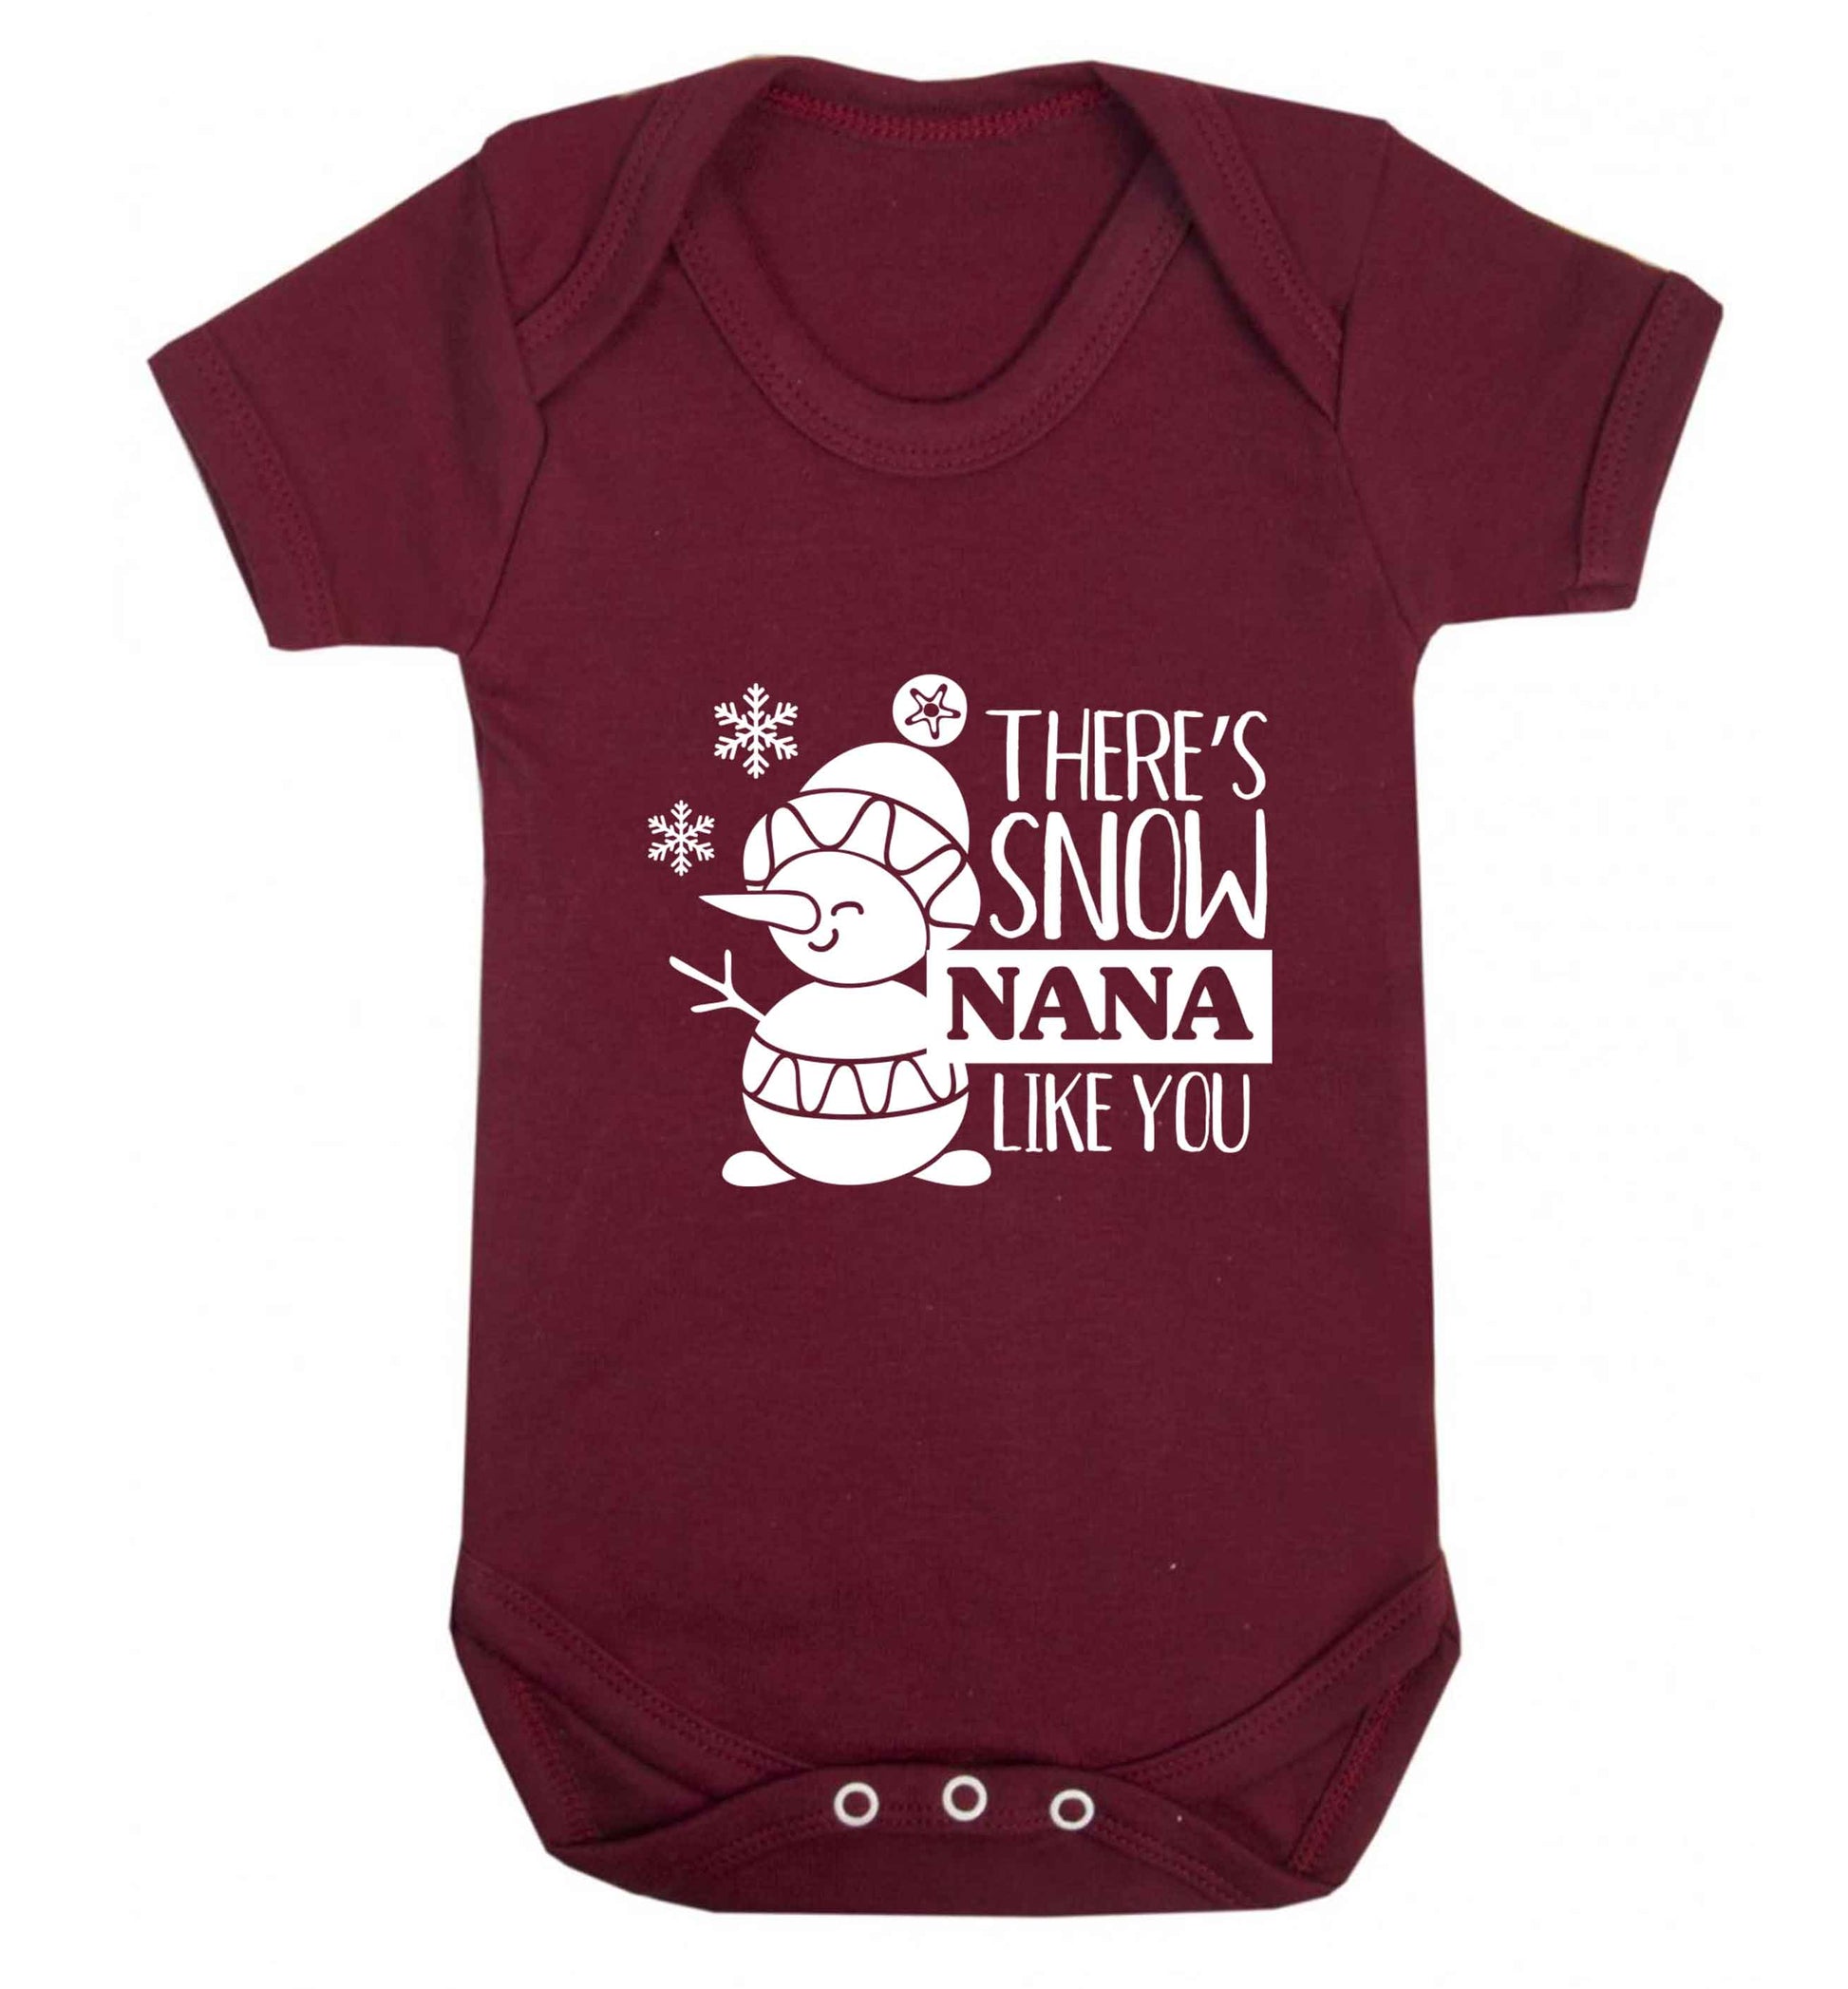 There's snow nana like you baby vest maroon 18-24 months